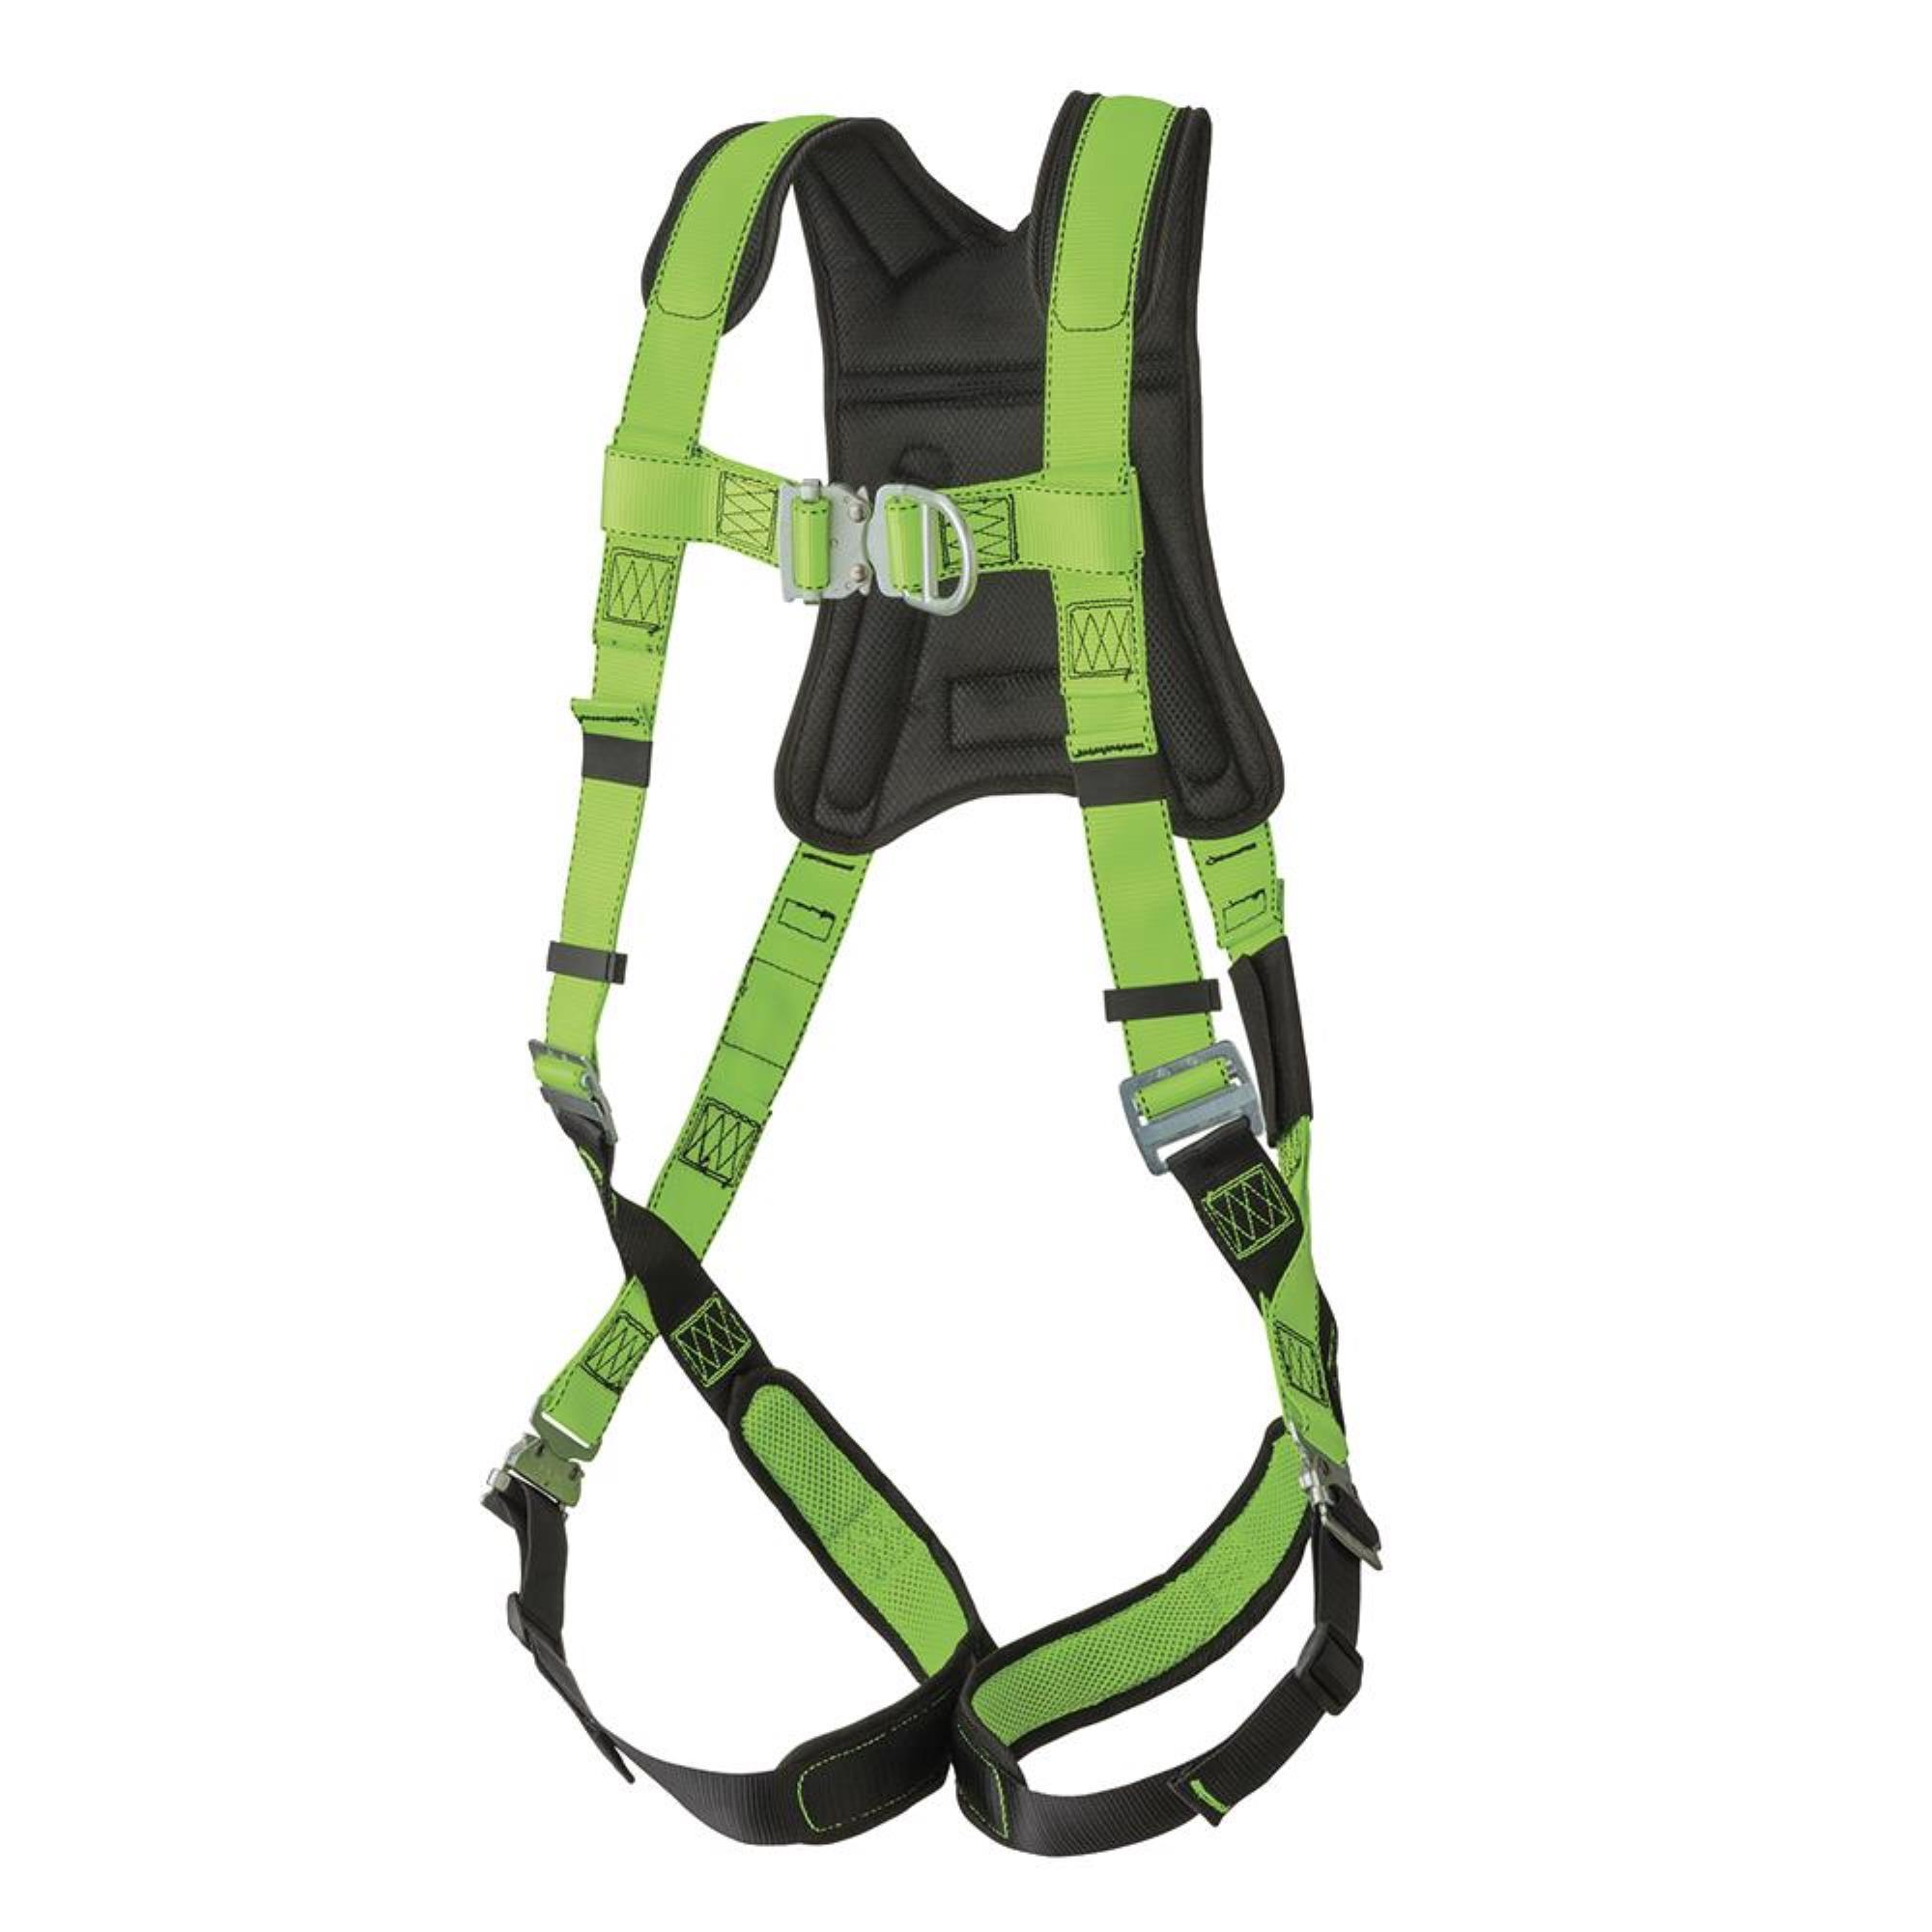 Peak Works, PeakPro Harness 2D 400 Lbs Class AL Trauma Strap, Weight Capacity 400 lb, Harness Size One Size, Model V8006120